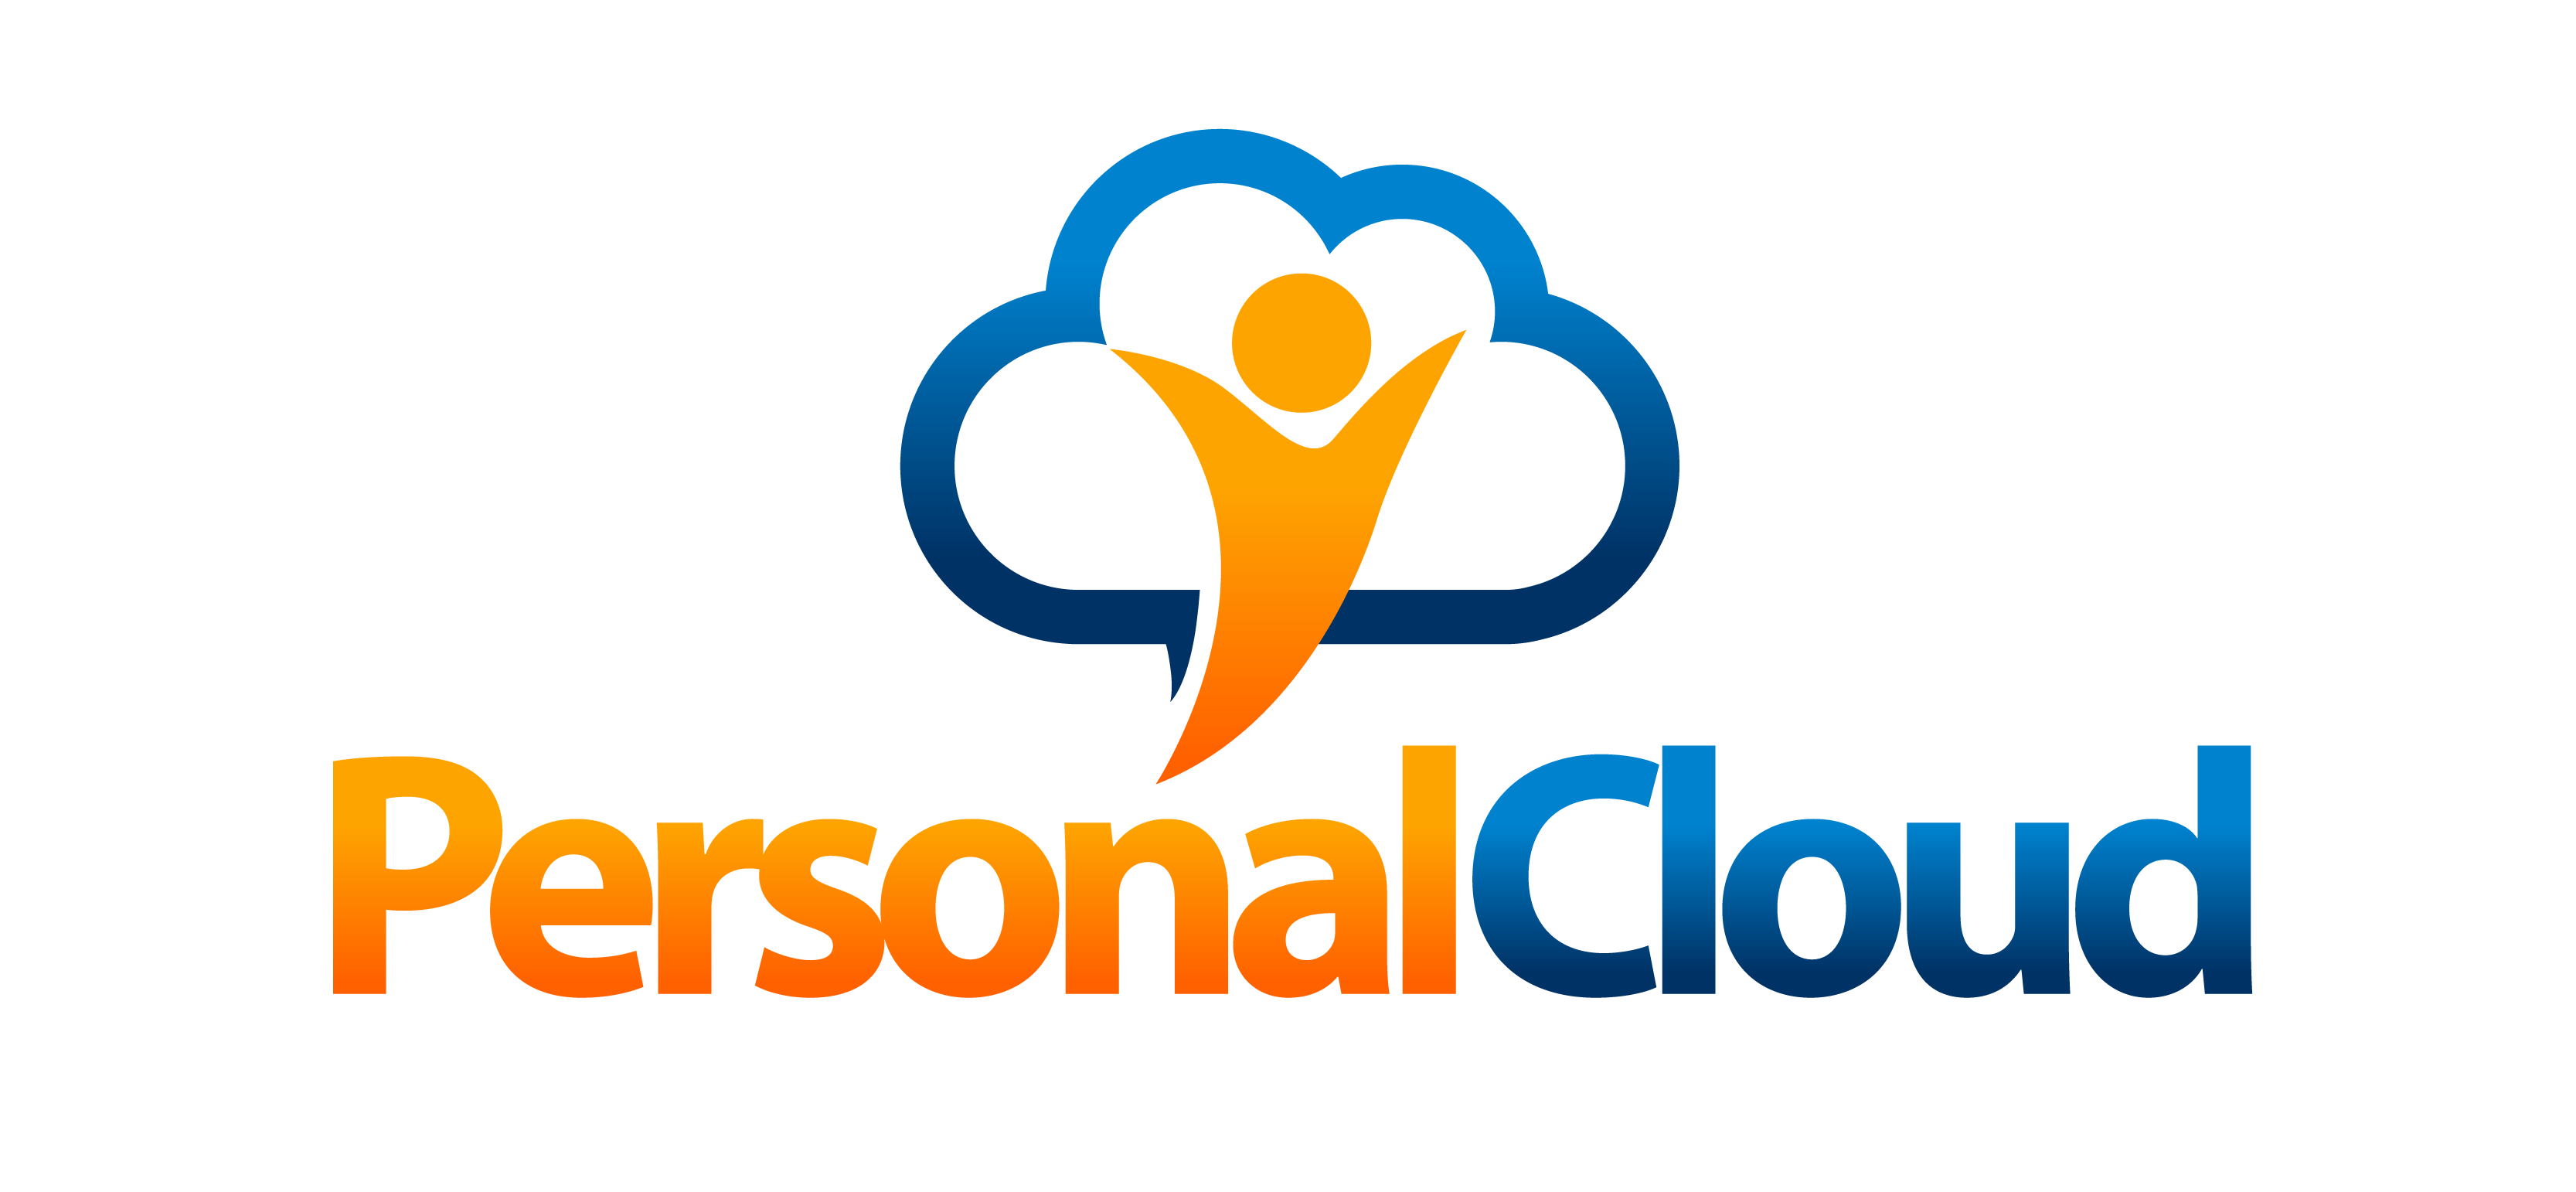 The Personal Clouds logo